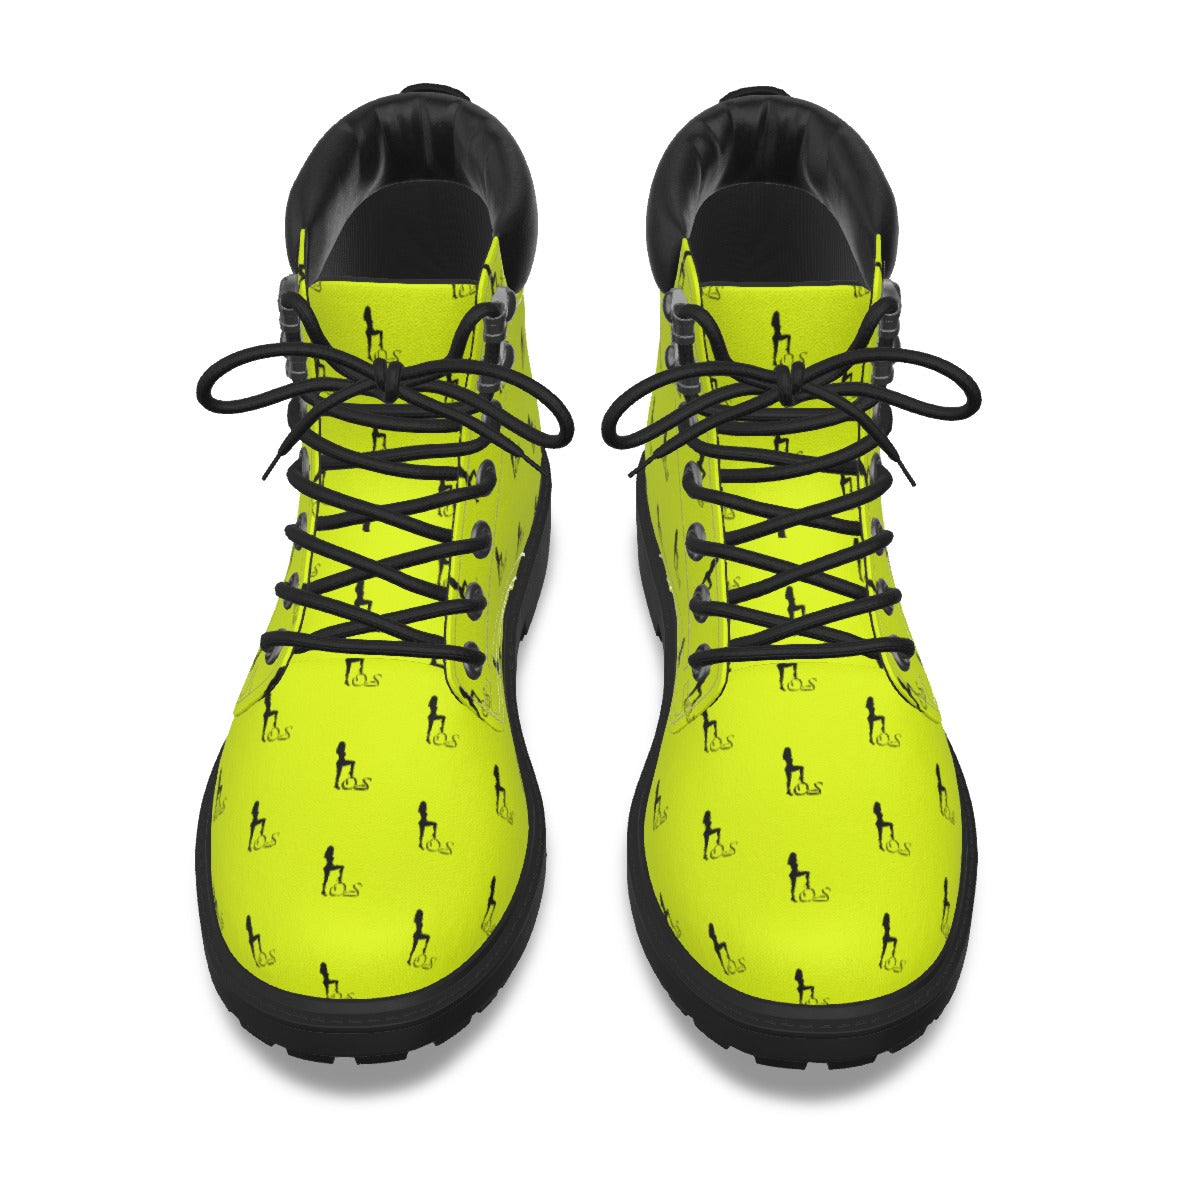 Officially Sexy Neon Yellow & Black Skyline Women's Short Boots